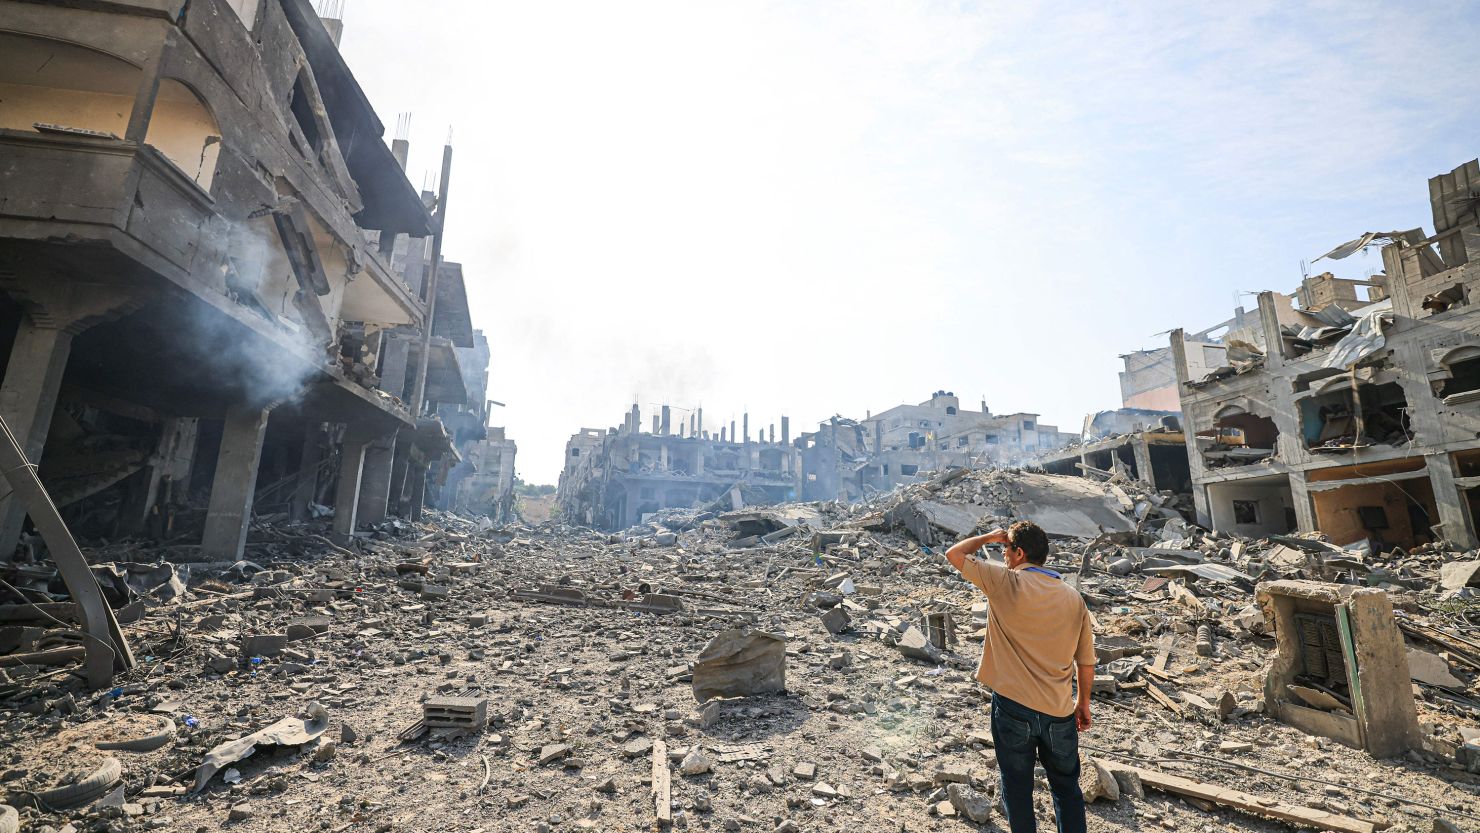 A man looks at the destruction in a ravaged neighborhood in the Gaza Strip Jabalya Refugee Camp on October 11.